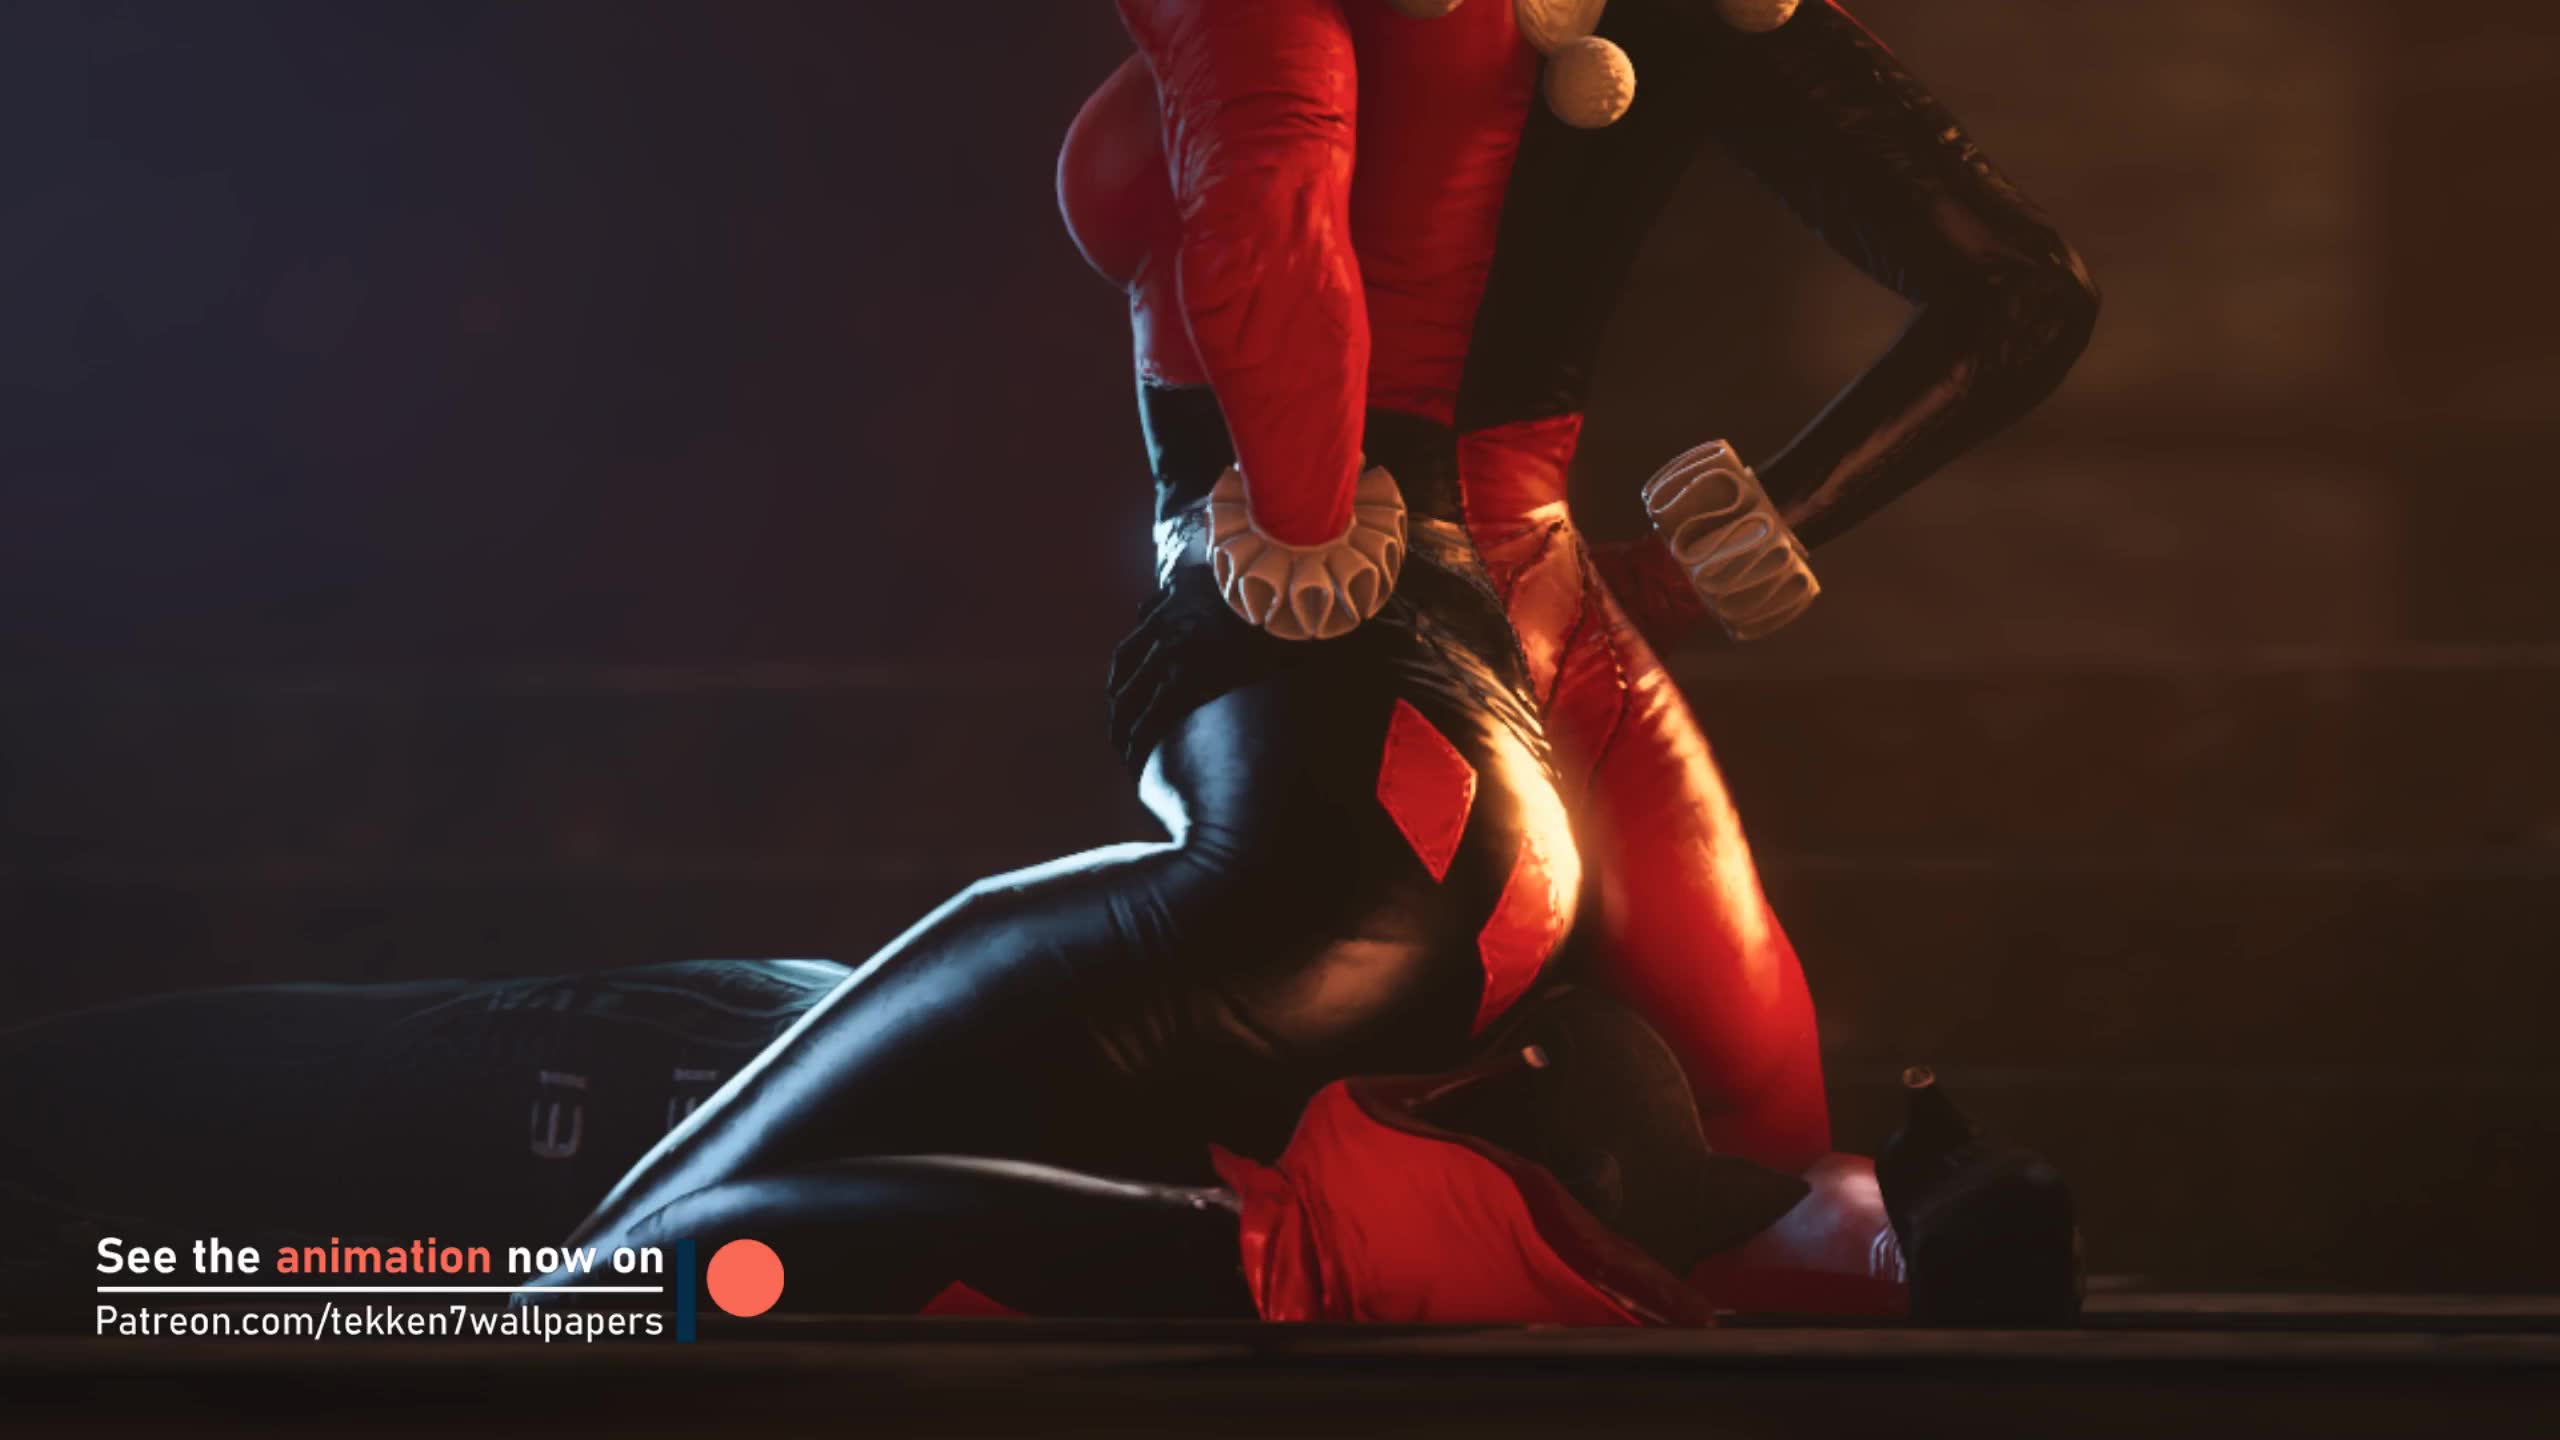 Harley sitting on Catwoman’s face – DC Comics NSFW animation thumbnail